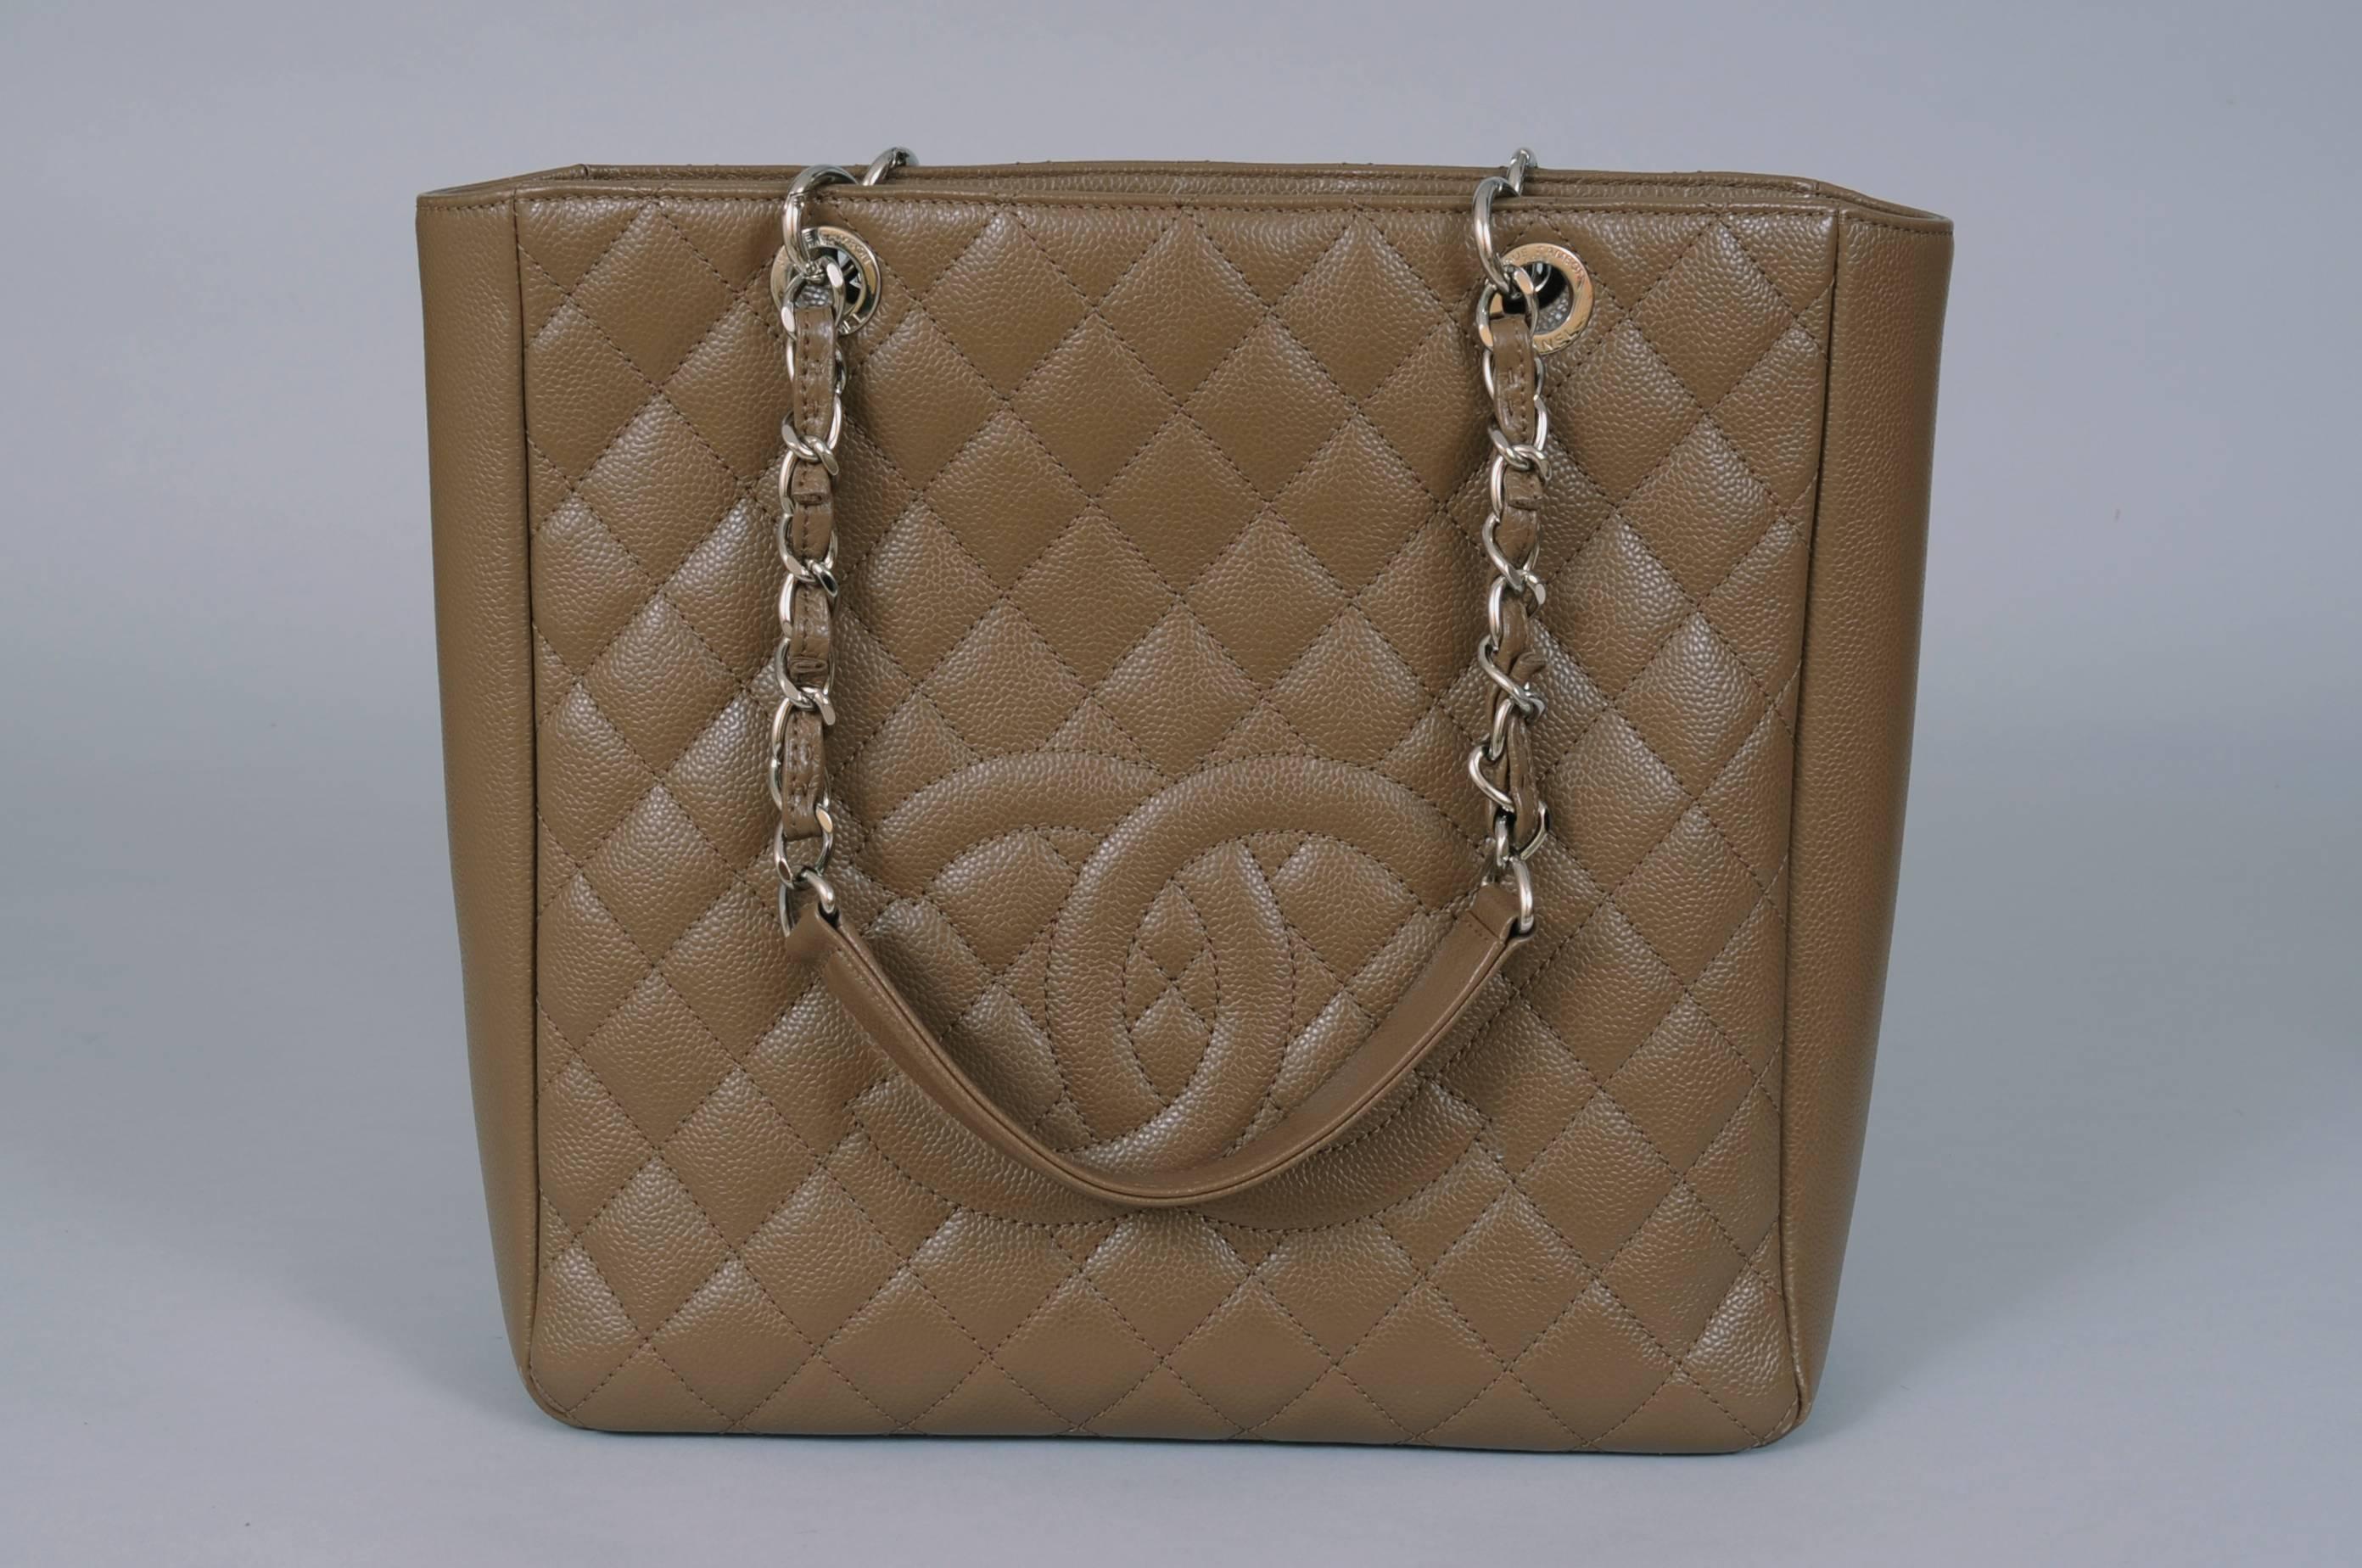 A classic style form Chanel this large tote is in excellent condition inside and out. and it comes with the original receipt from the Chanel Boutique. The bag has double leather and silver toned chain straps, a Chanel logo on the front and a slip